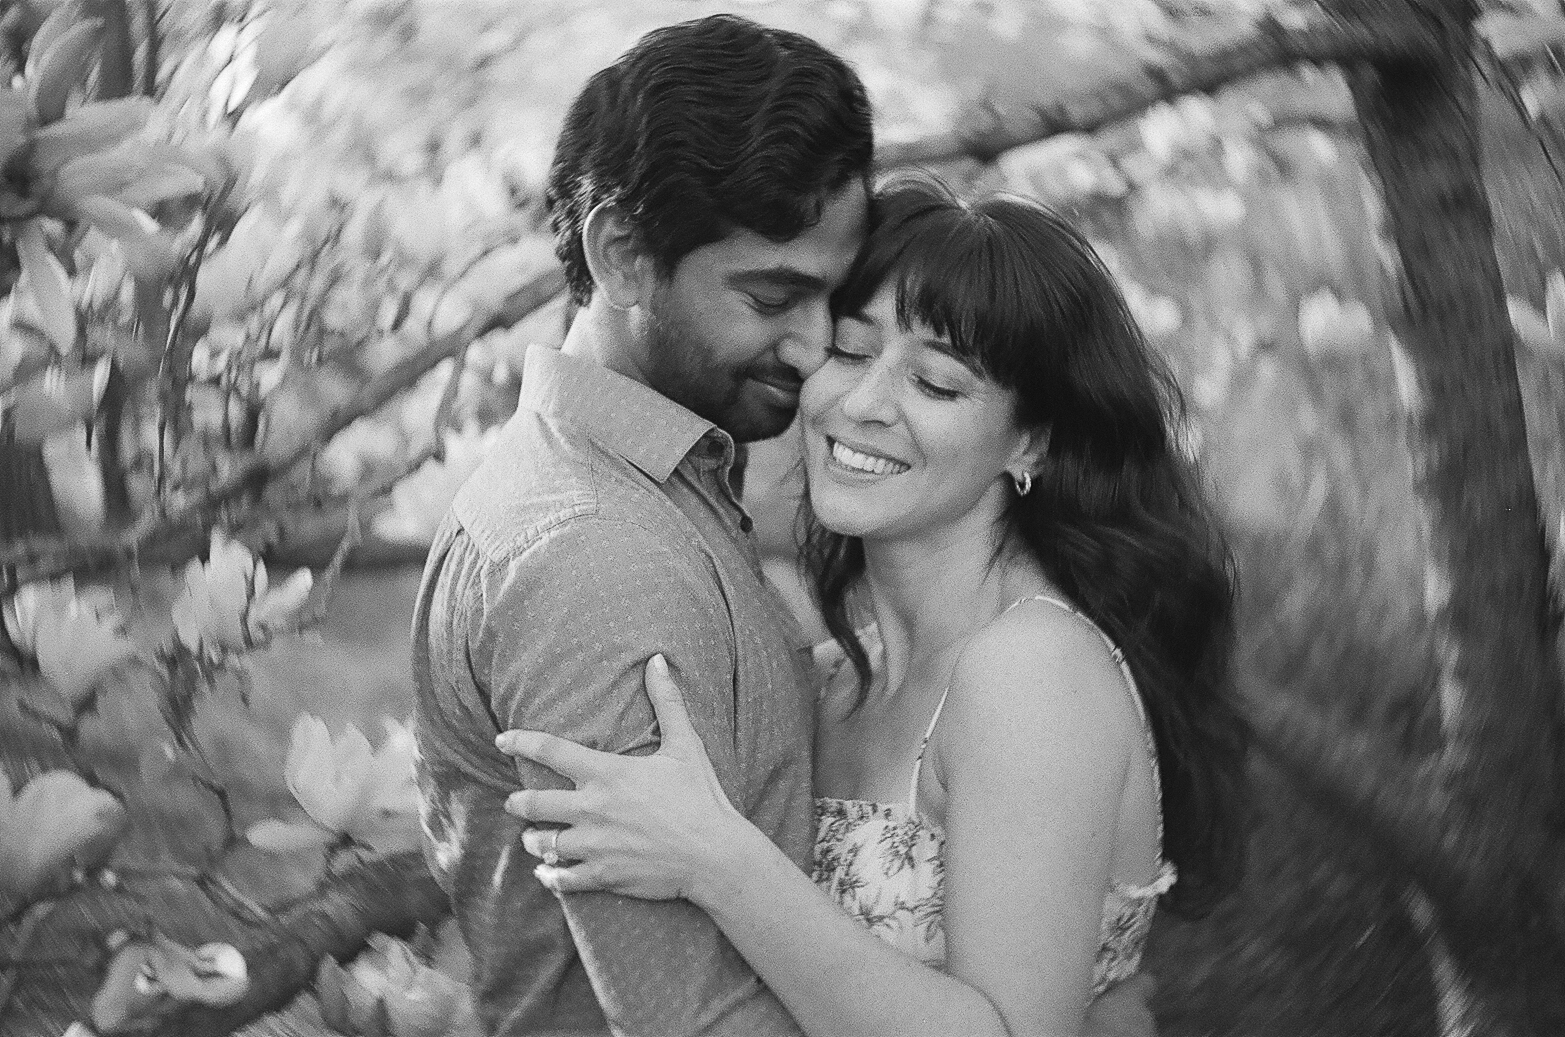 A monochrome film image of a smiling couple embracing tenderly among blooming flowers.